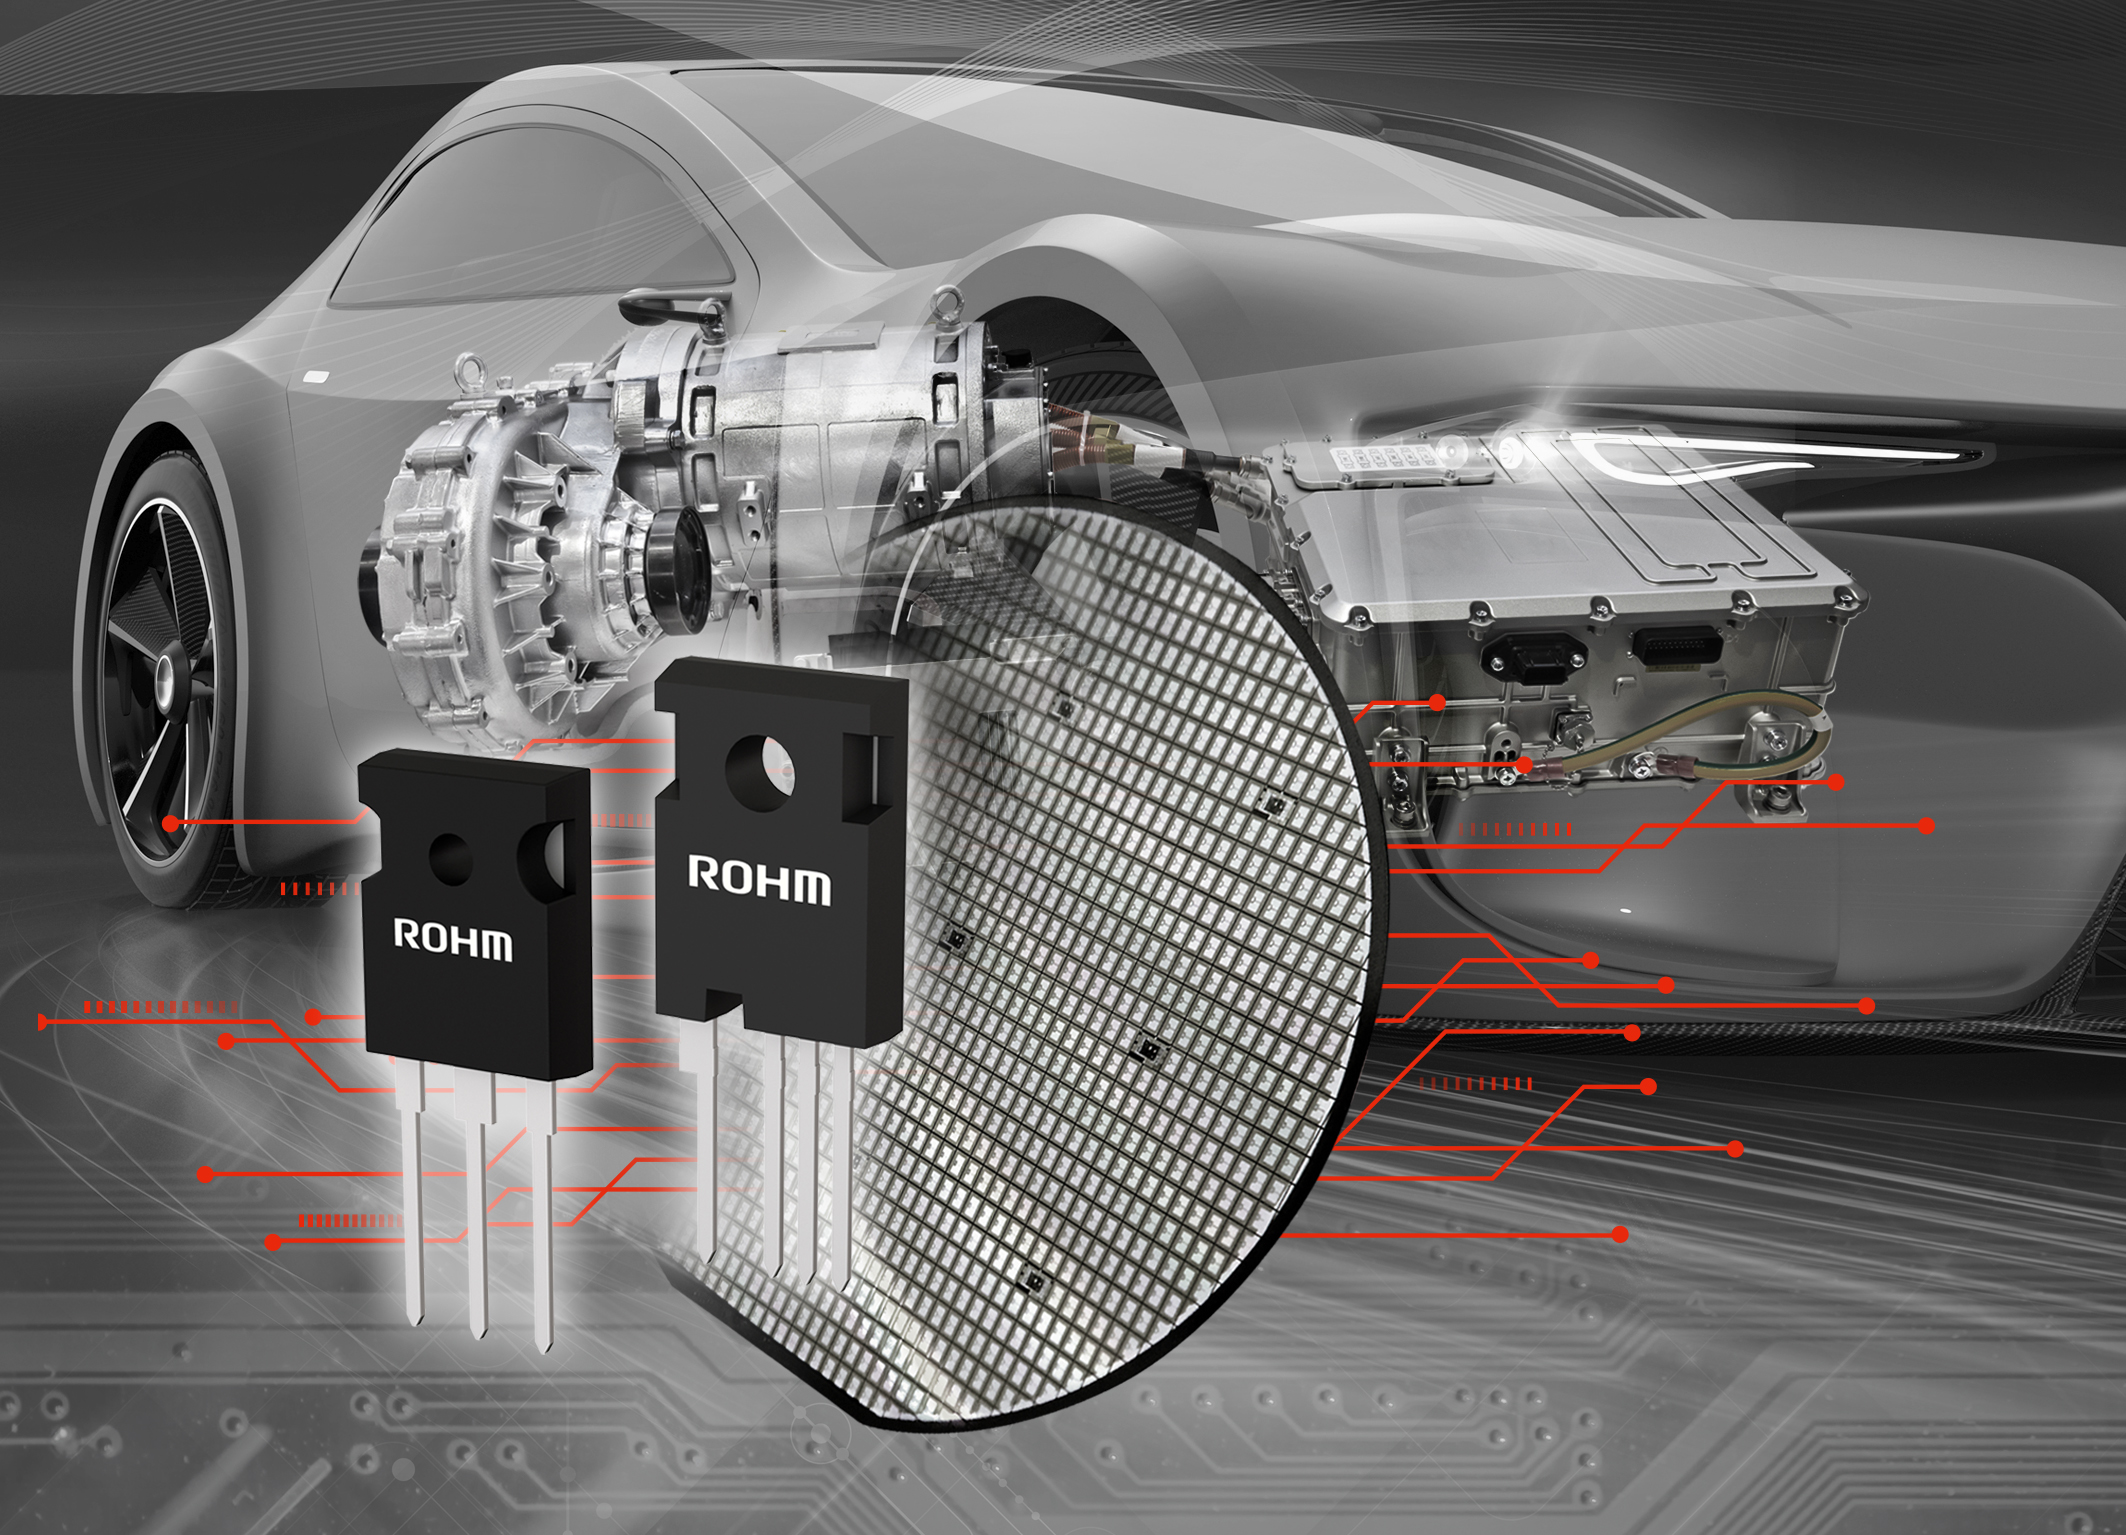 ROHM's 4th Generation 1200V SiC MOSFETs optimized for automotive powertrain systems, including the main drive inverter, as well as power supplies for industrial equipment.